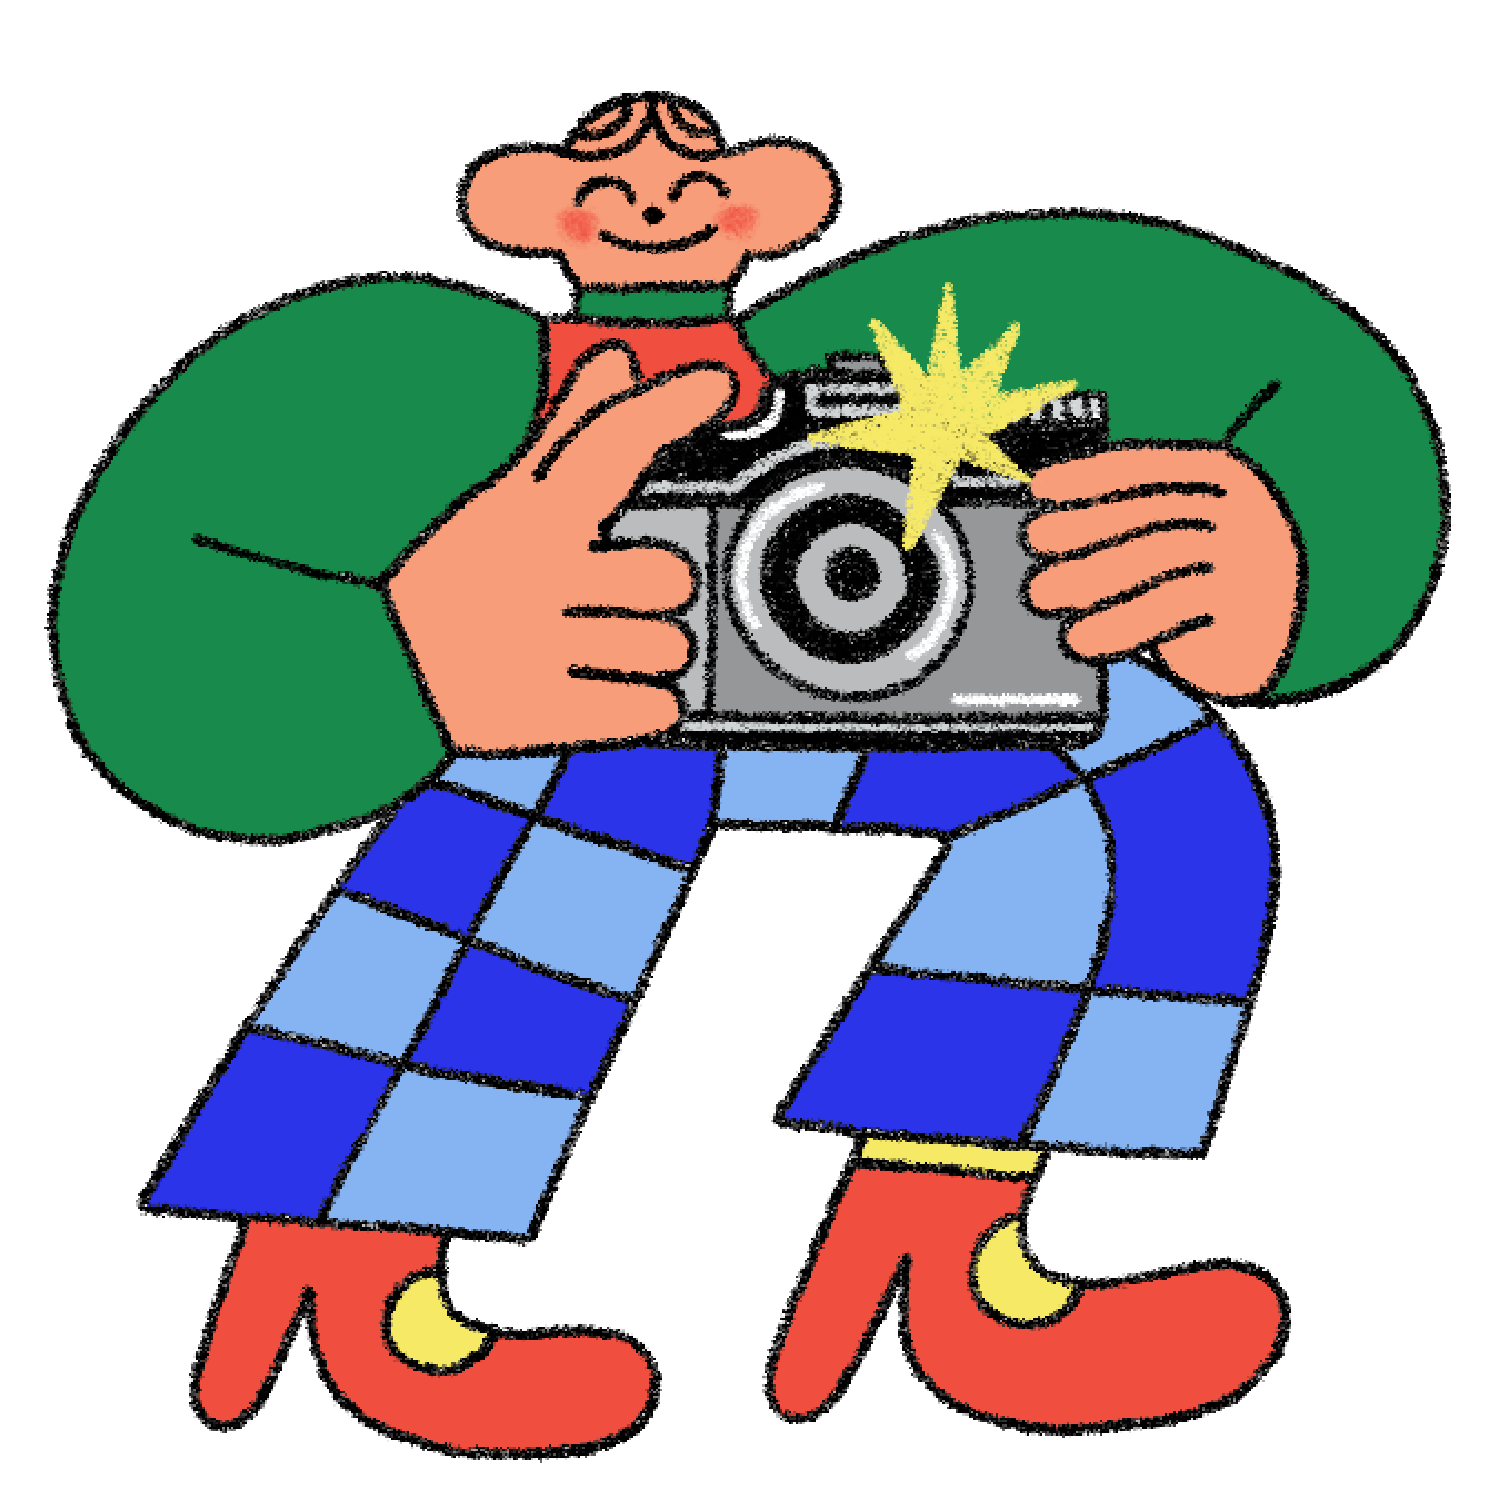 An illustration of a person taking a professional headshot of someone for work